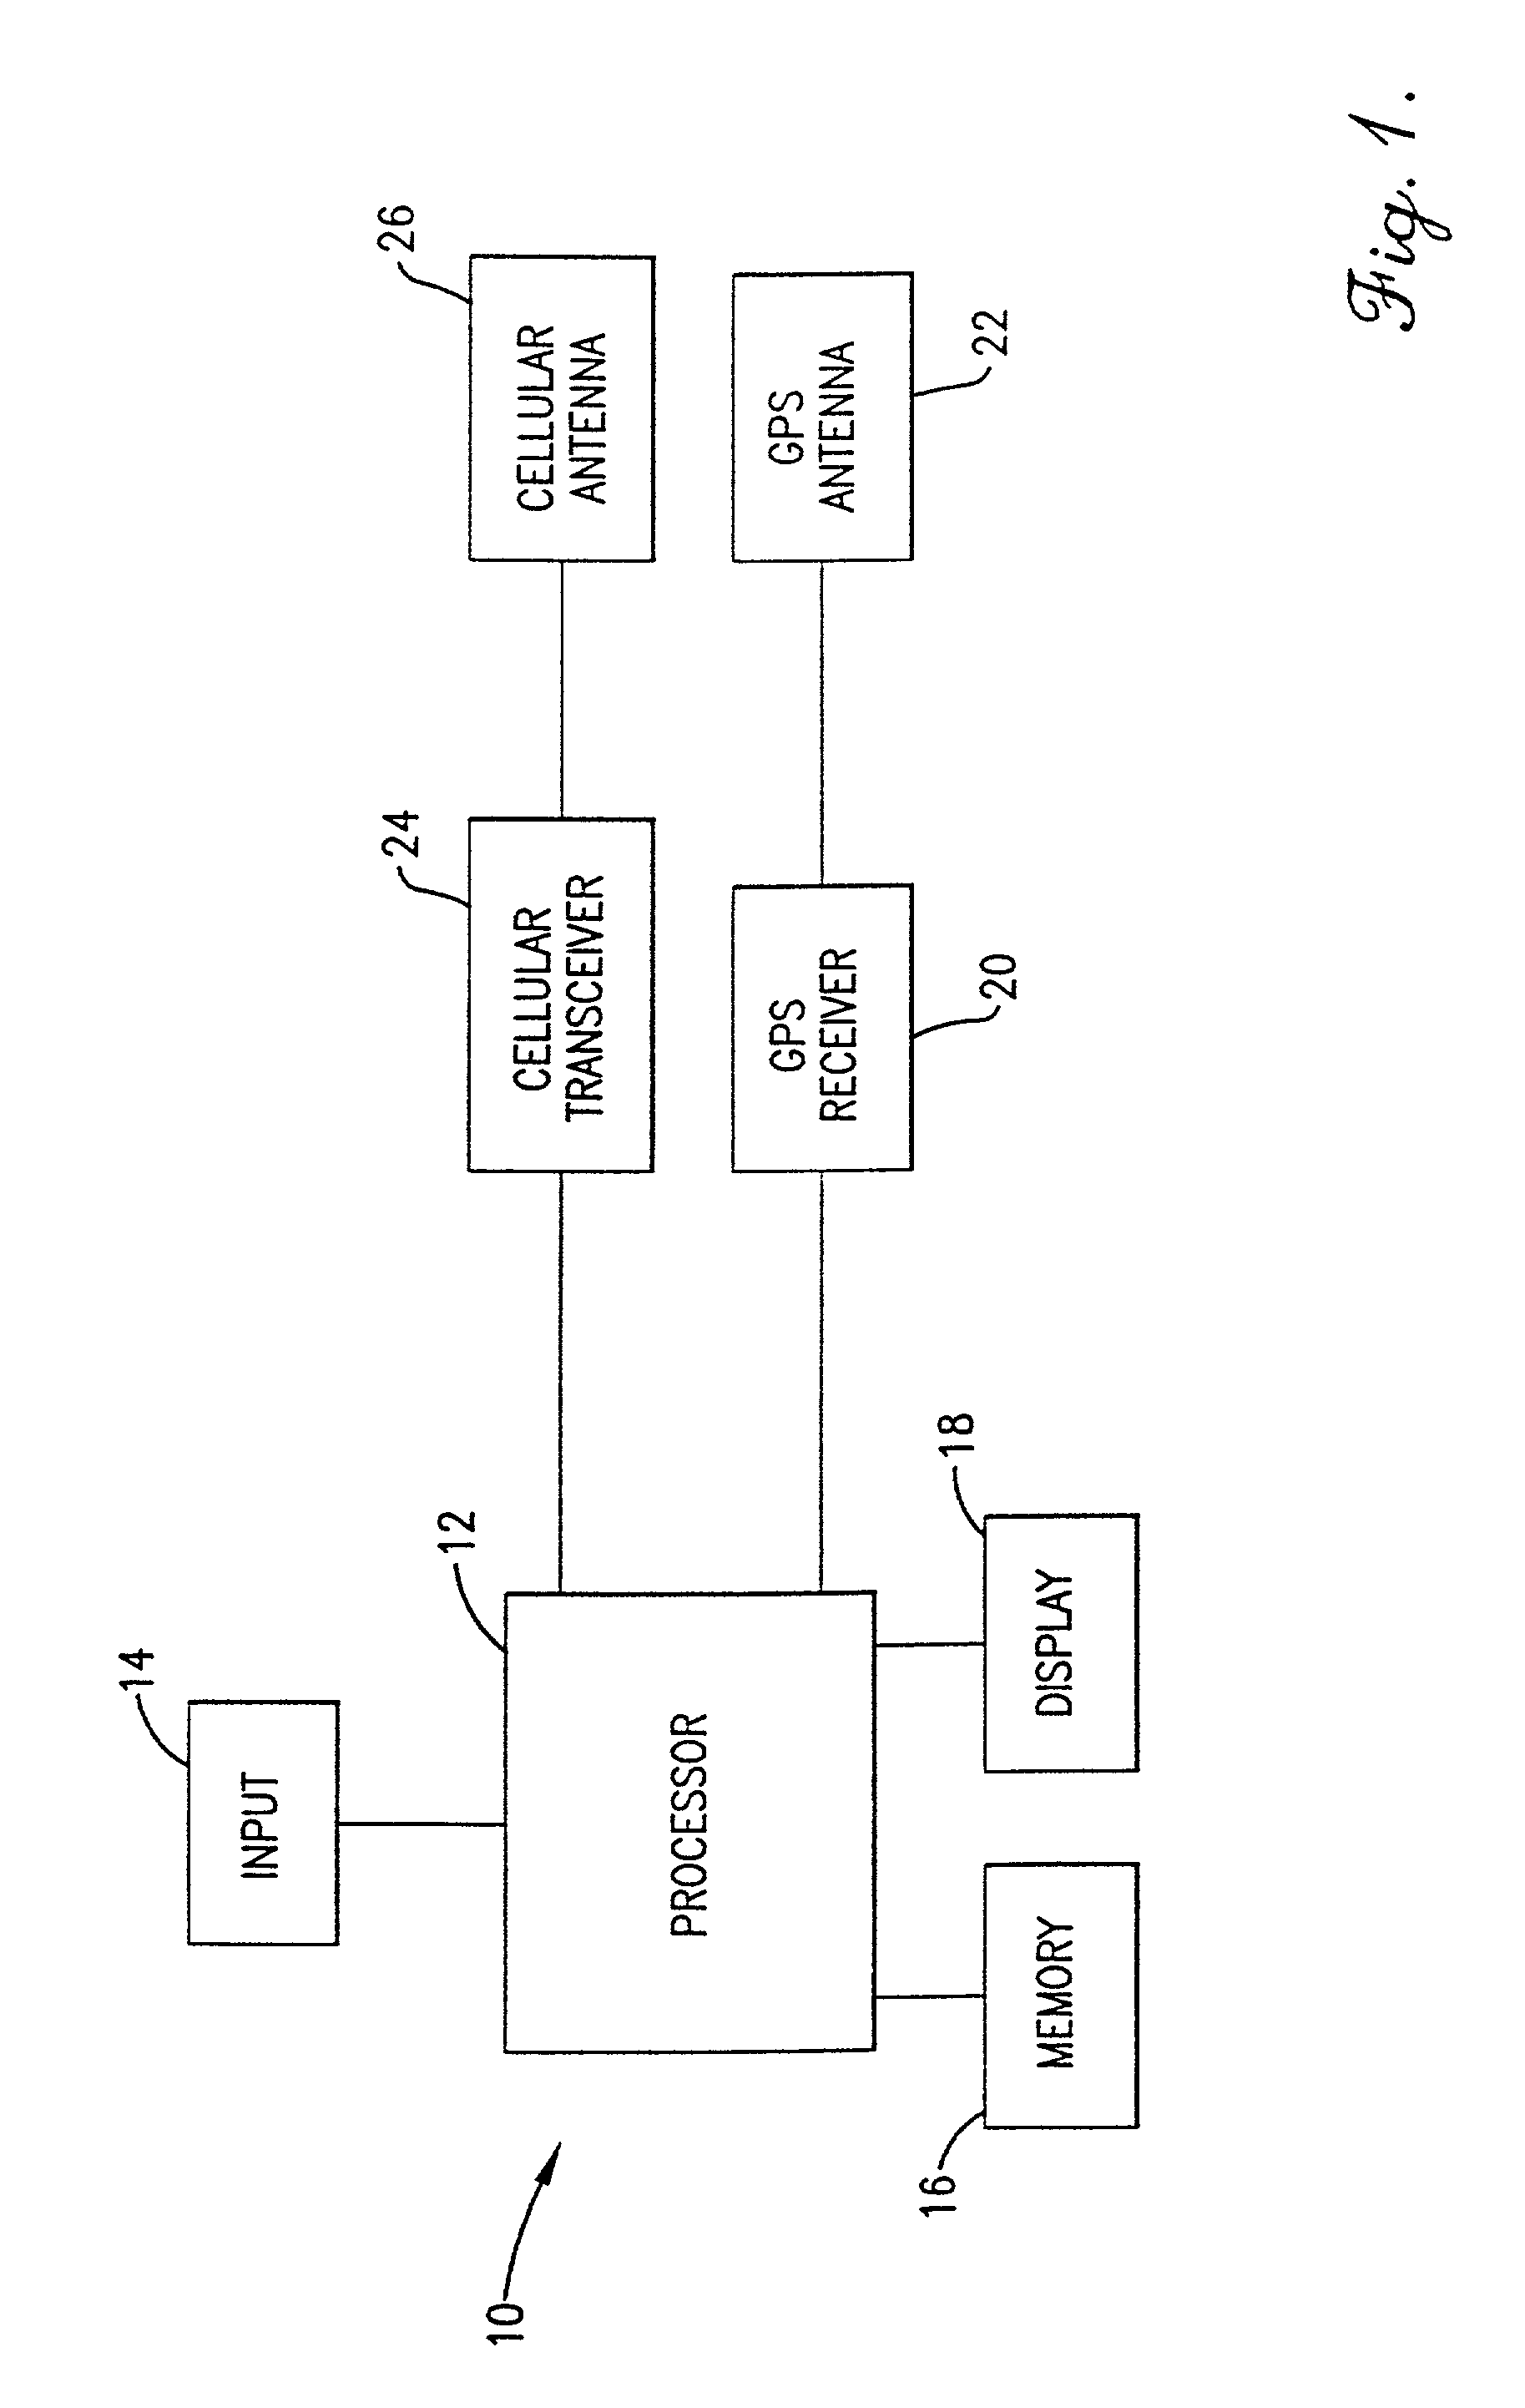 Method and system for minimizing storage and processing of ionospheric grid point correction information in a wireless communications device